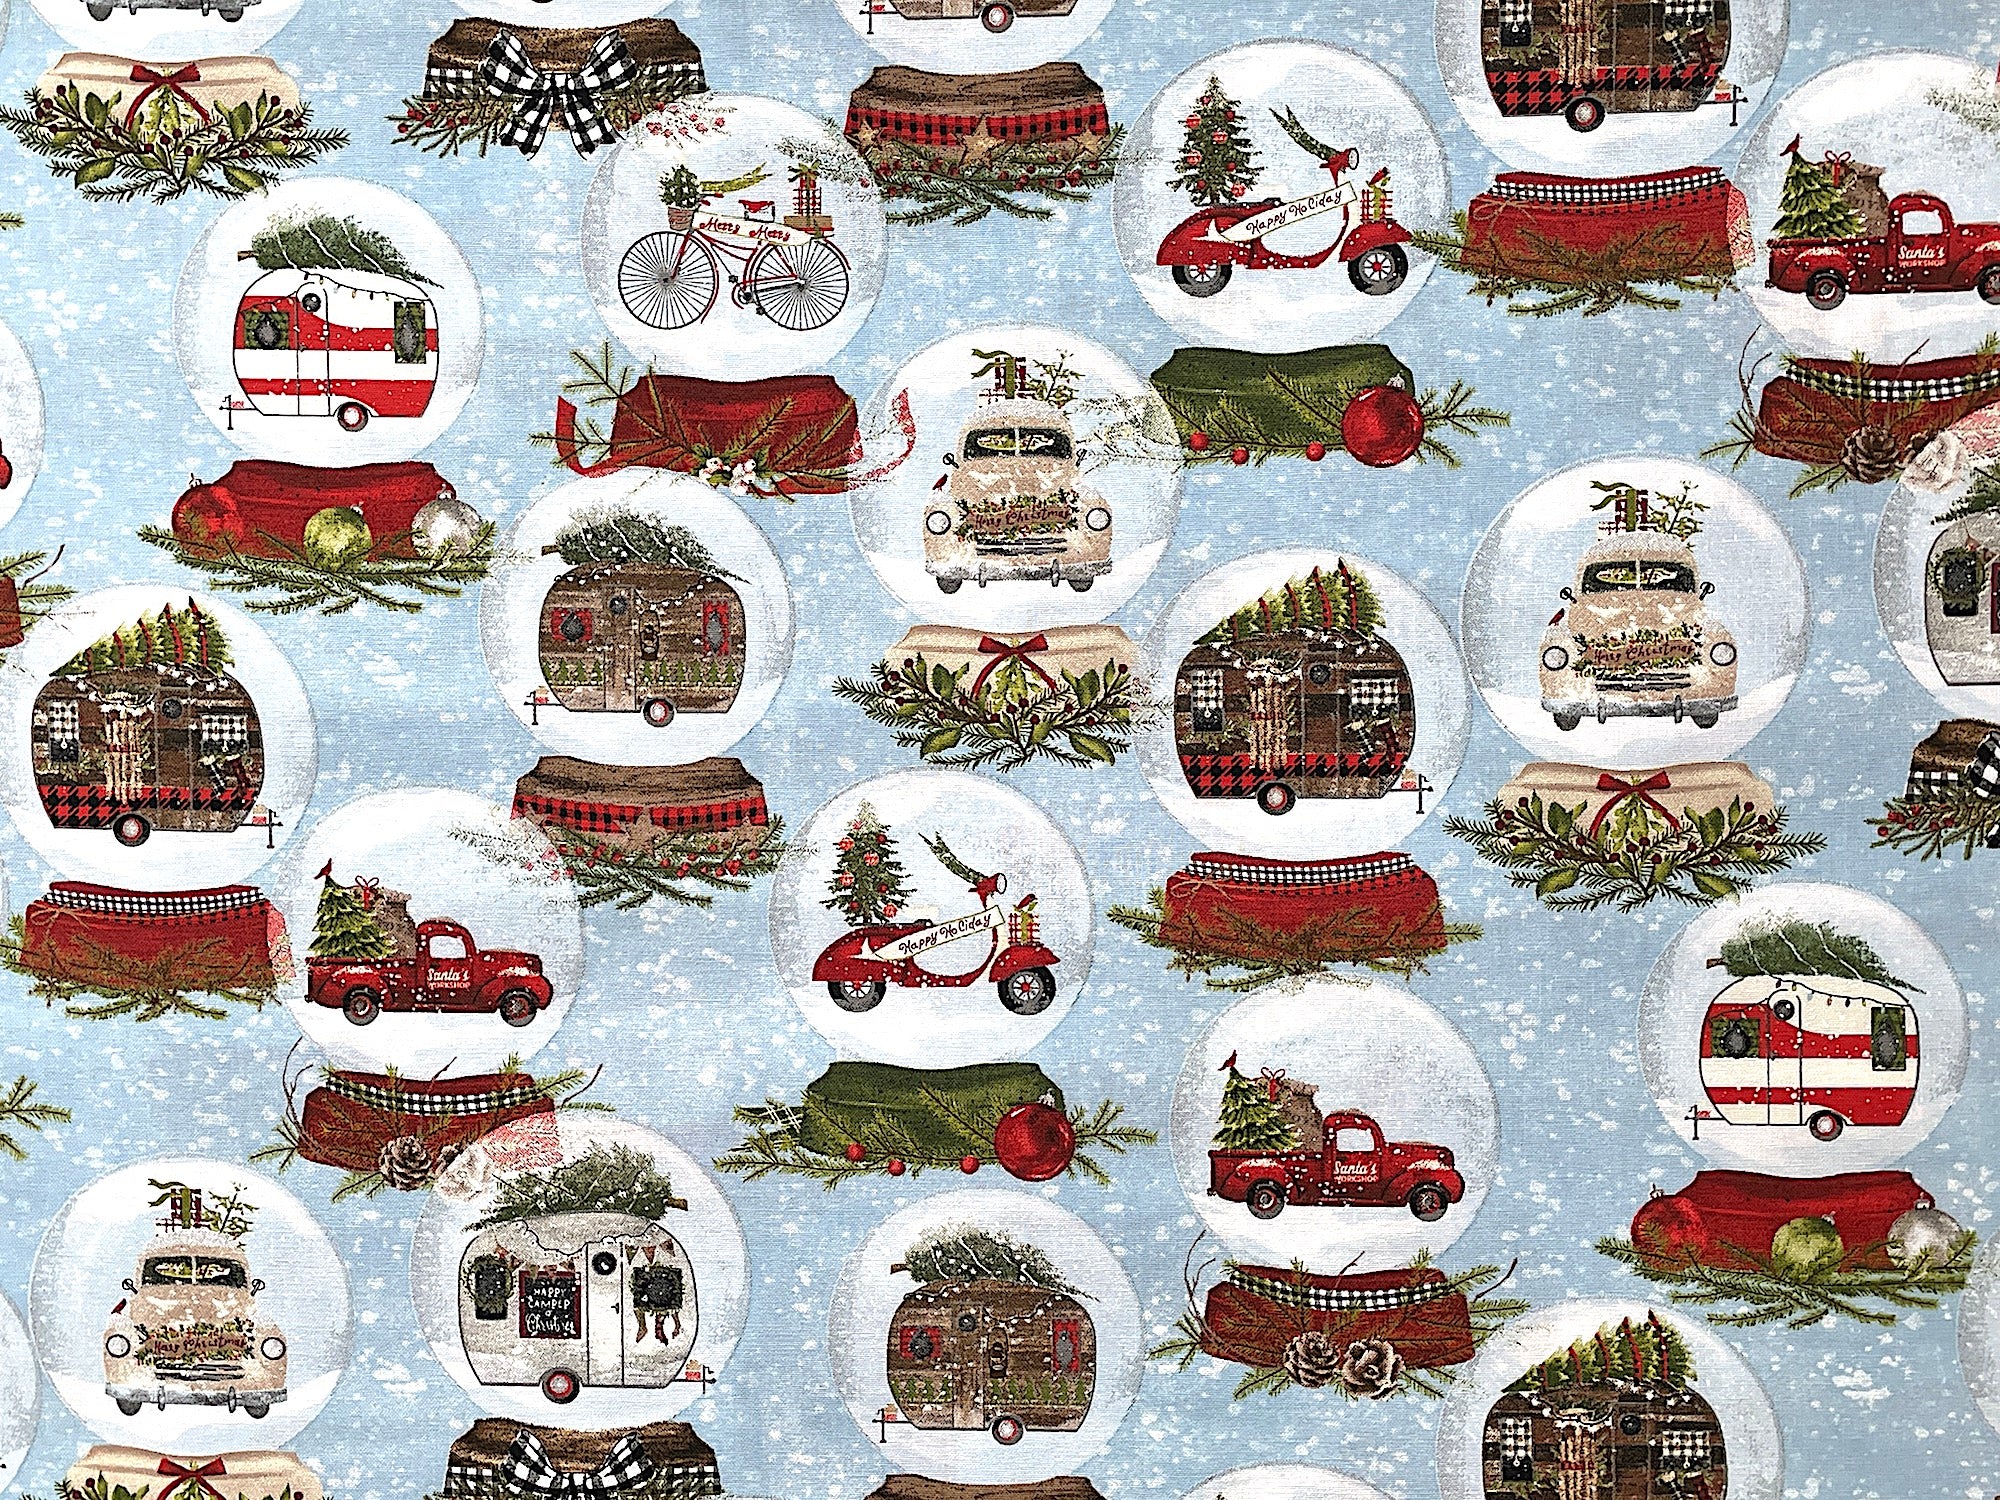 Blue cotton fabric covered with snow globes that are filled with red trucks, RV's motorbikes and more.